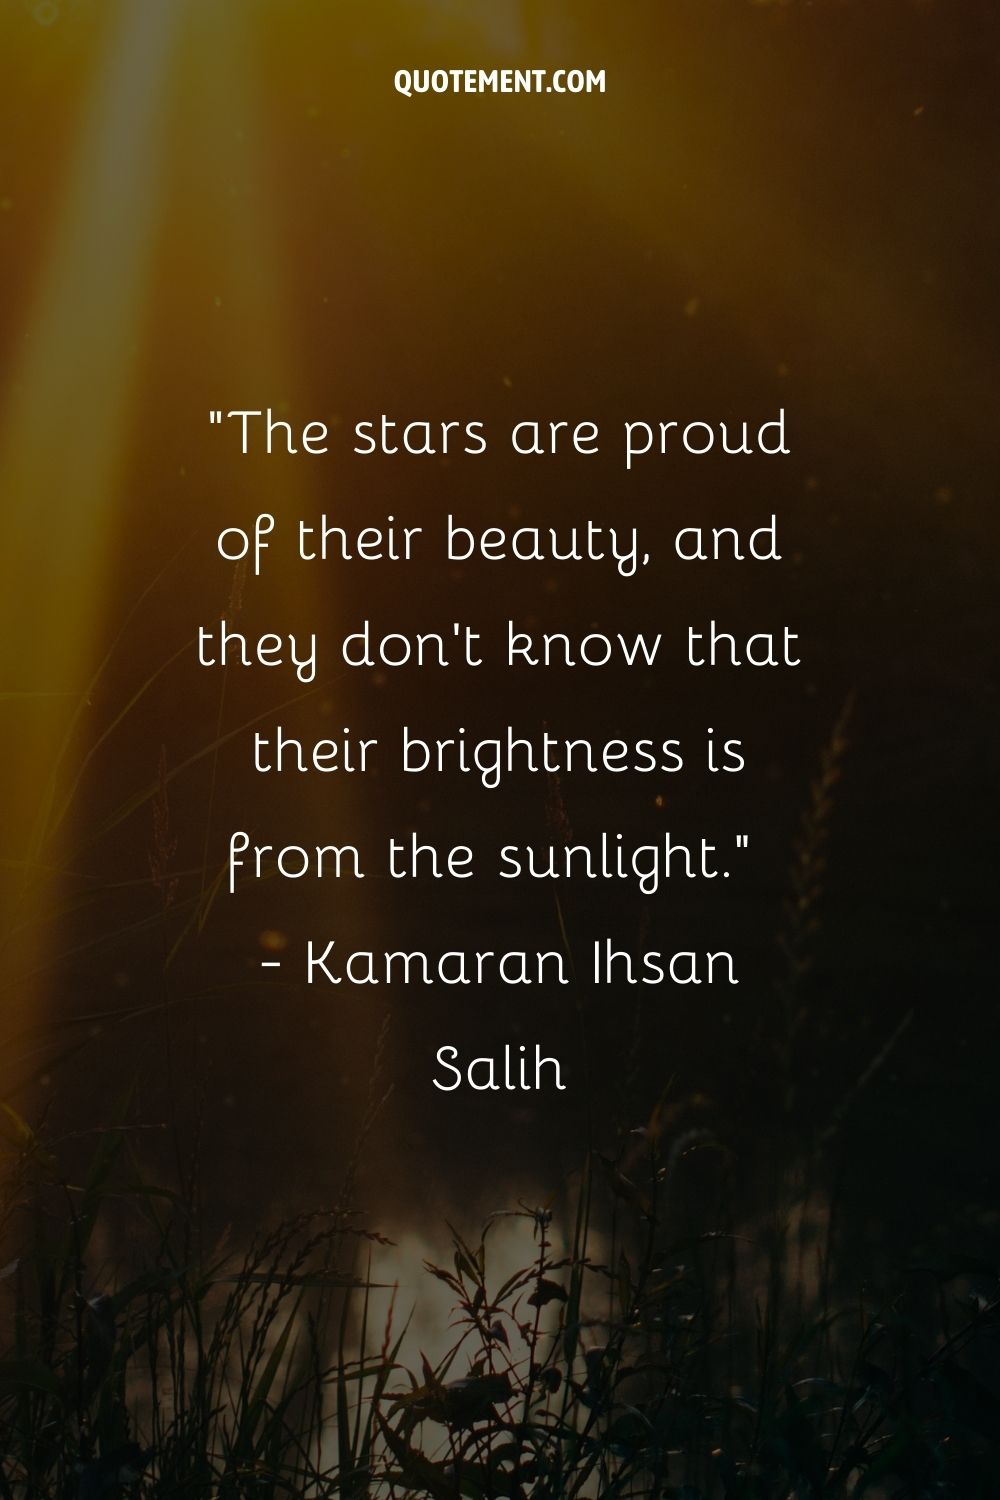 The stars are proud of their beauty, and they don't know that their brightness is from the sunlight